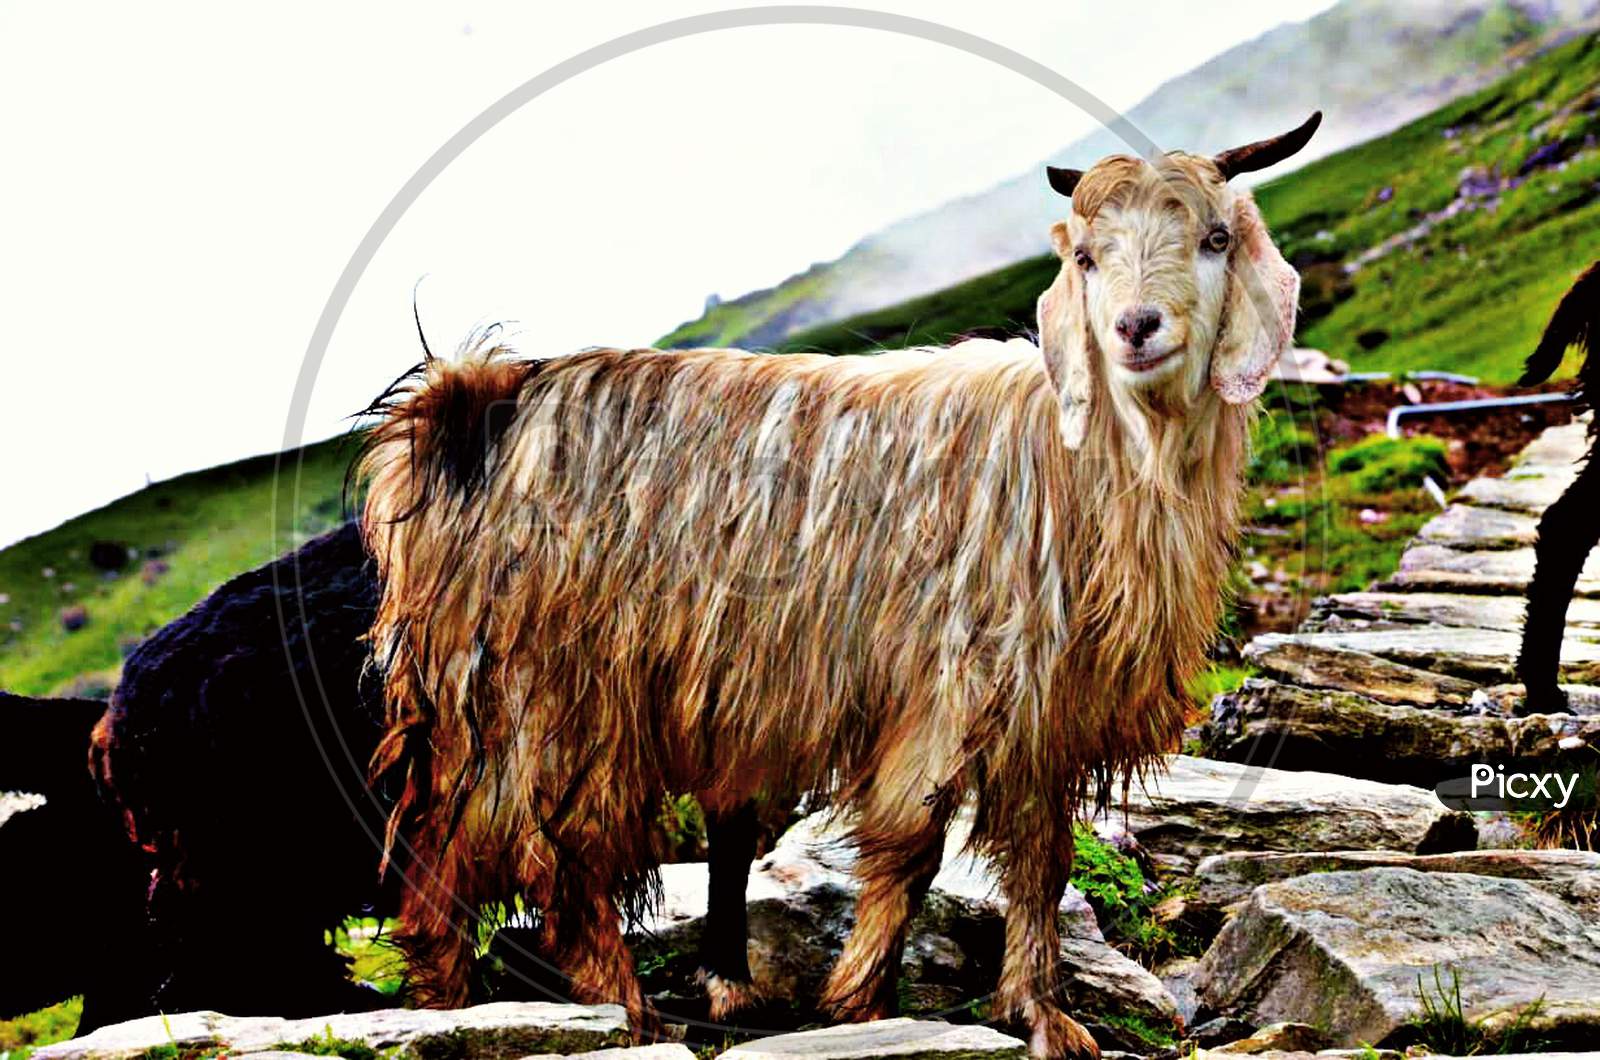 A goat in mountains